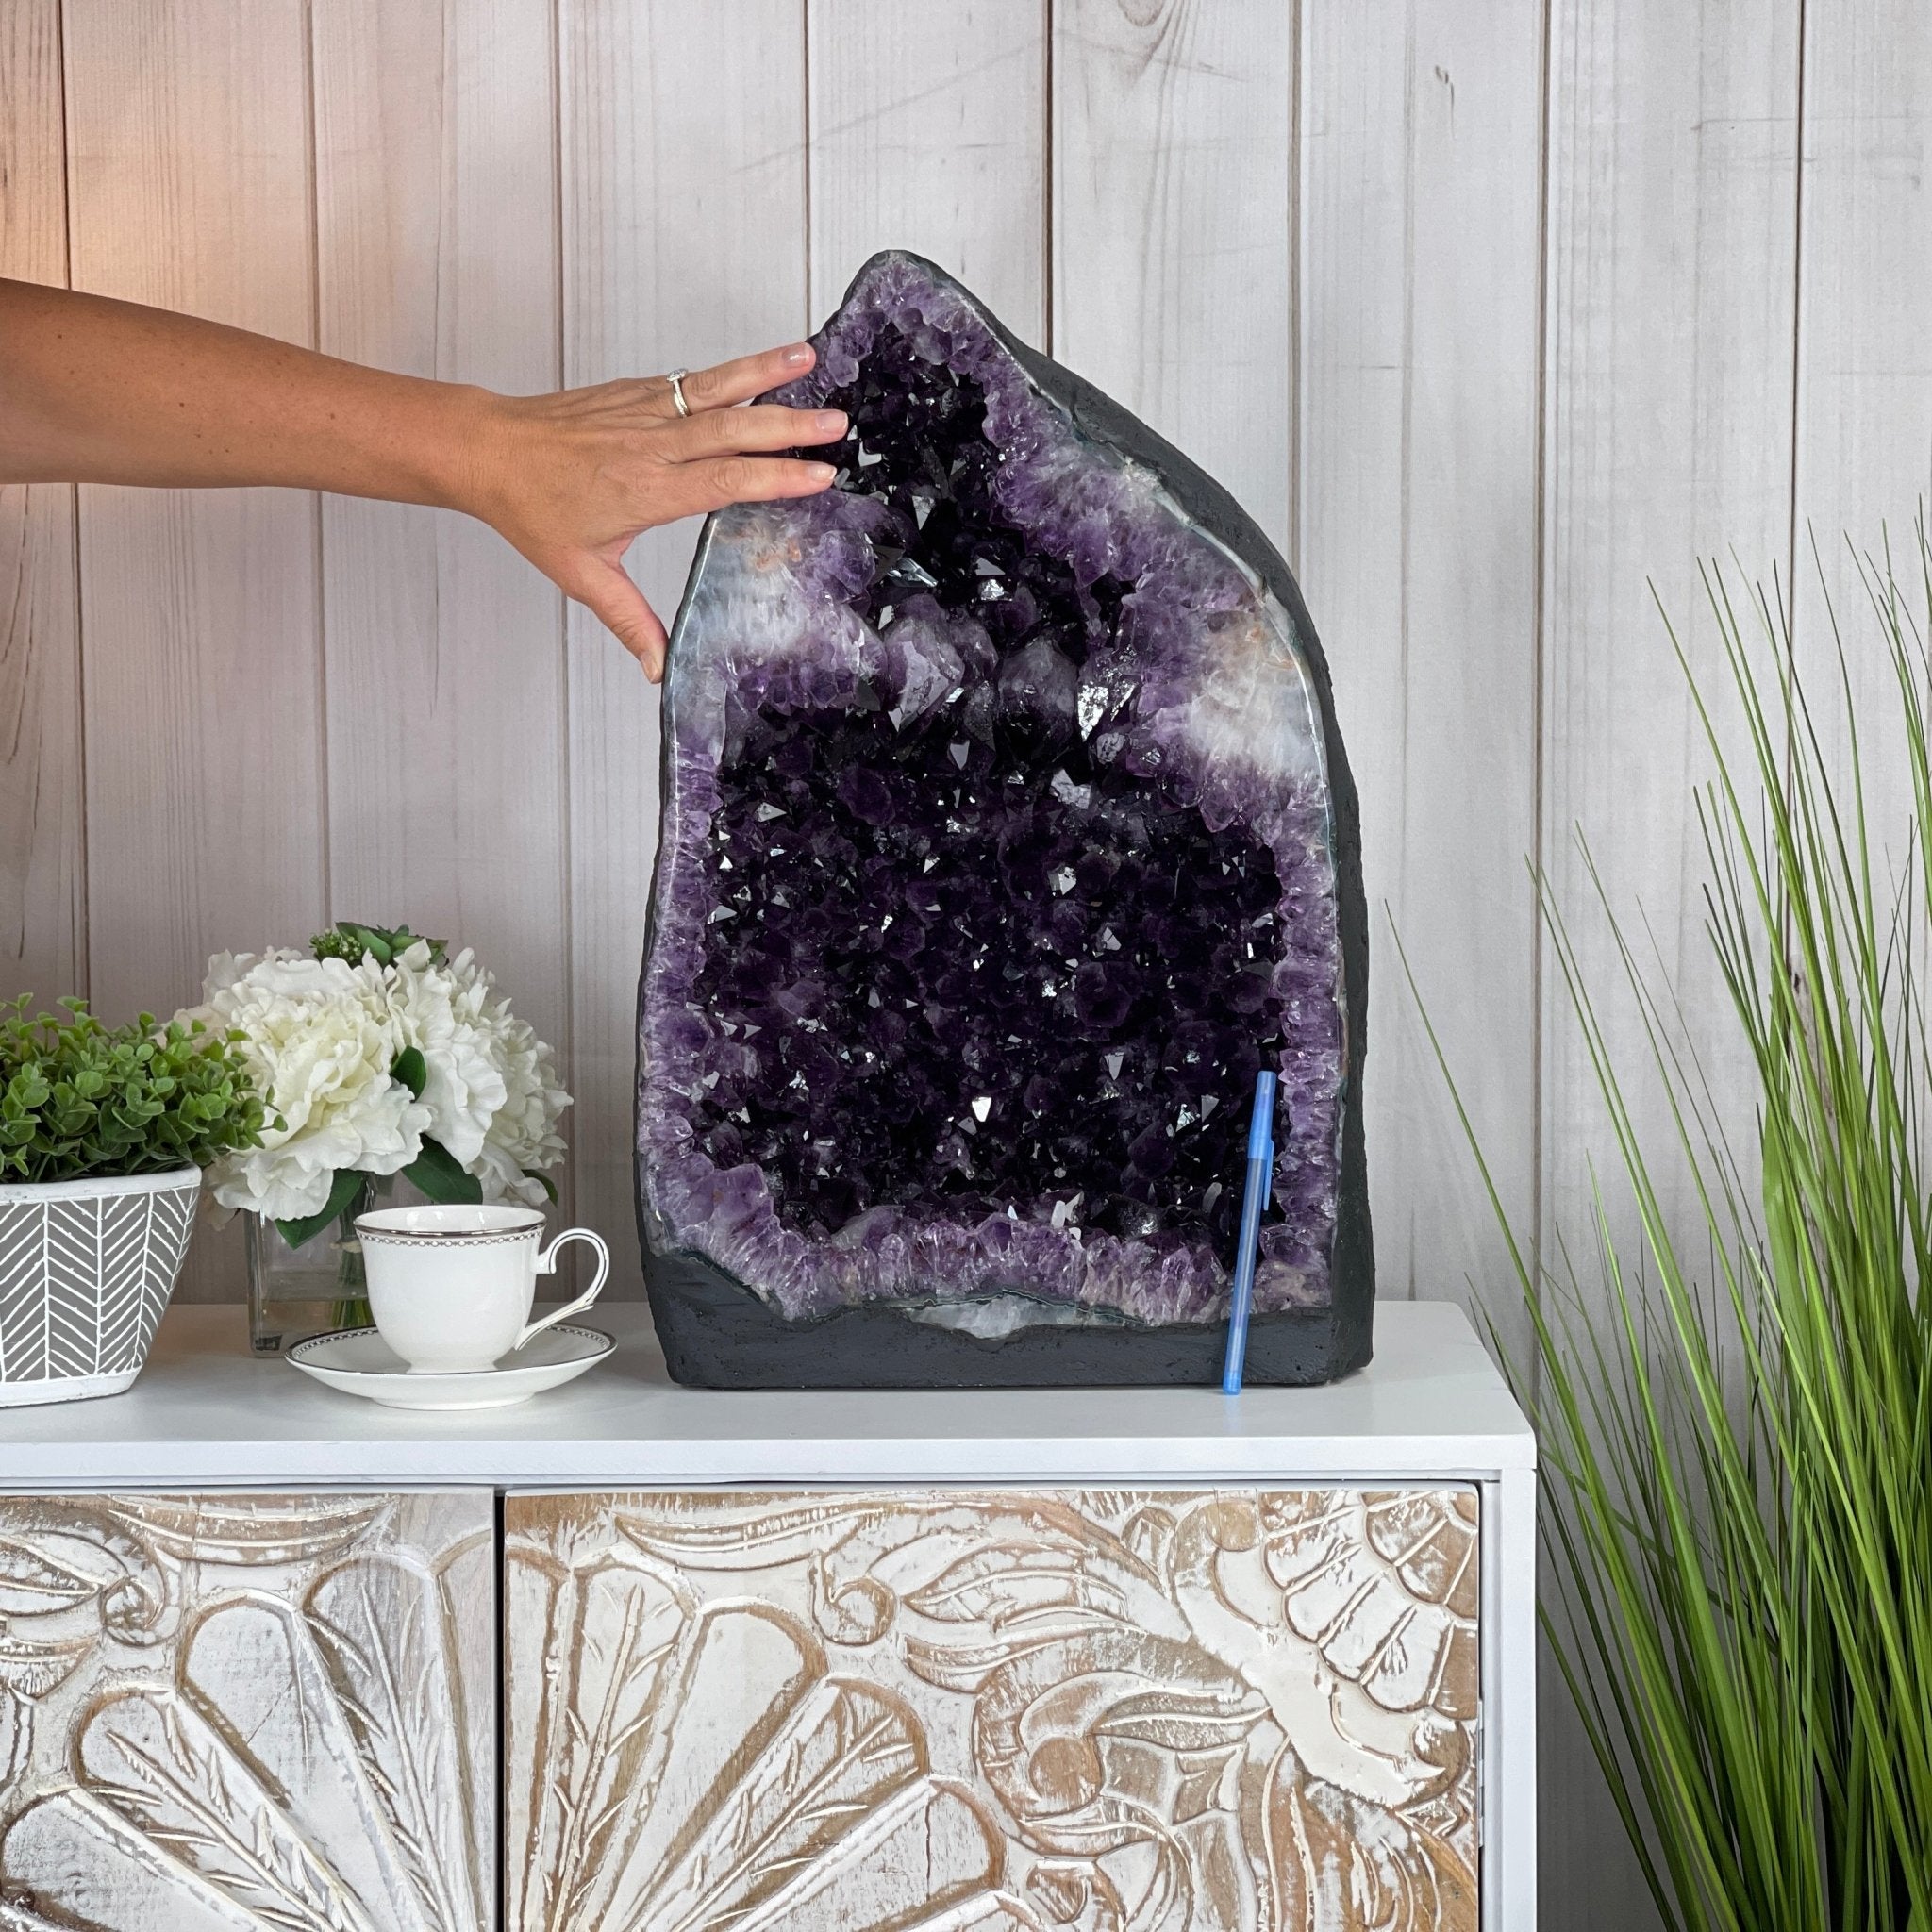 Extra Quality Brazilian Amethyst Cathedral, 20.75” tall & 73 lbs #5601-0444 by Brazil Gems - Brazil GemsBrazil GemsExtra Quality Brazilian Amethyst Cathedral, 20.75” tall & 73 lbs #5601-0444 by Brazil GemsCathedrals5601-0444